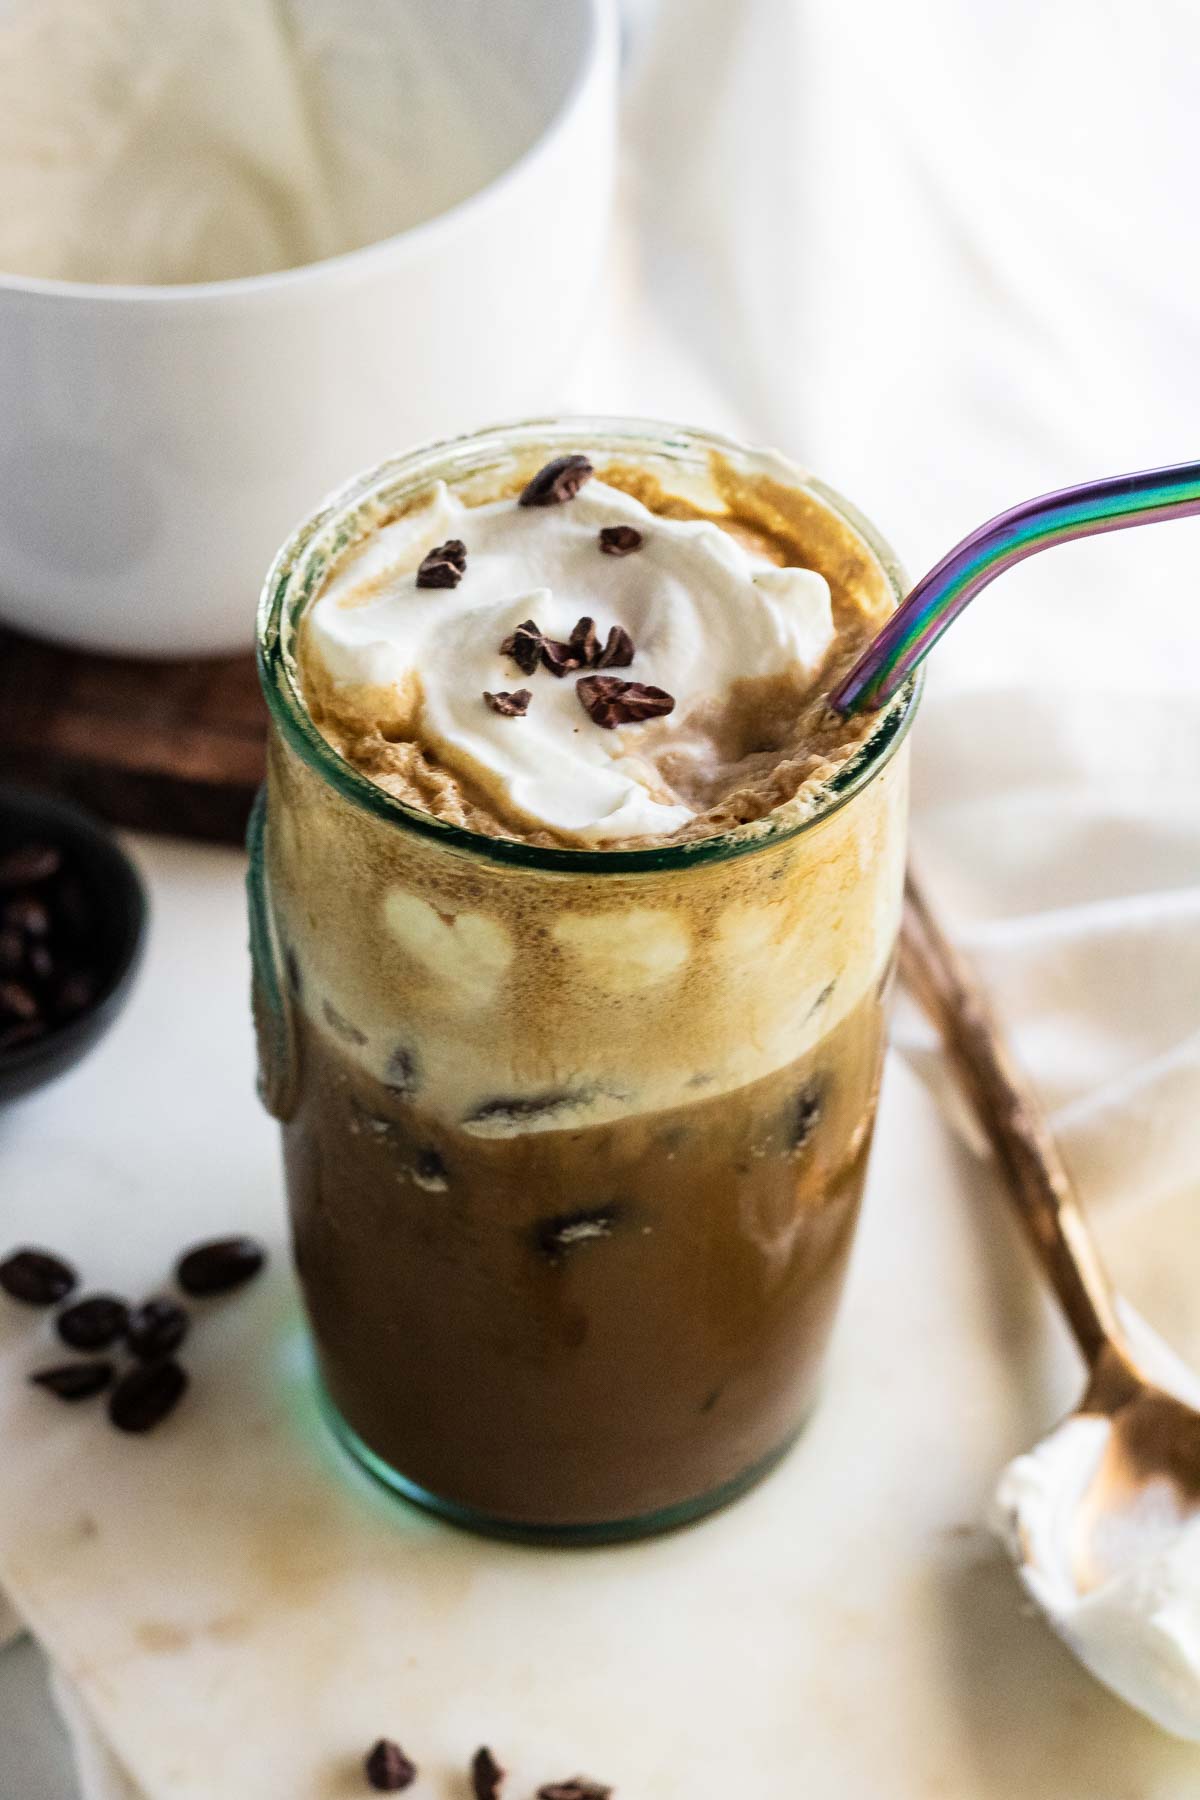 An iced coffee with whipped cream and cacao nibs on top.